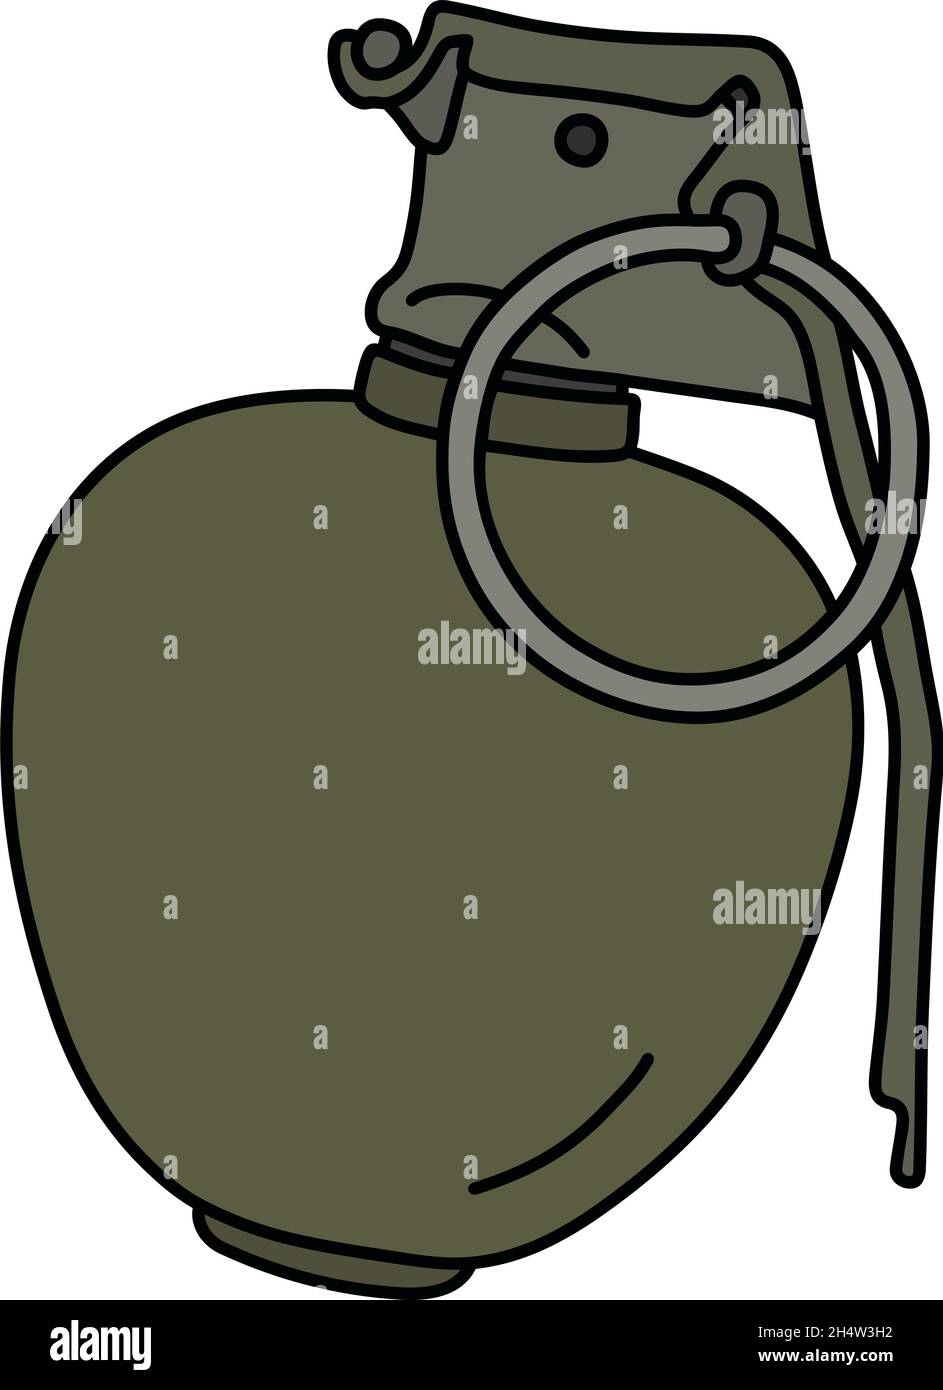 The vectorized hand drawing of an old khaki offensive hand grenade Stock Vector